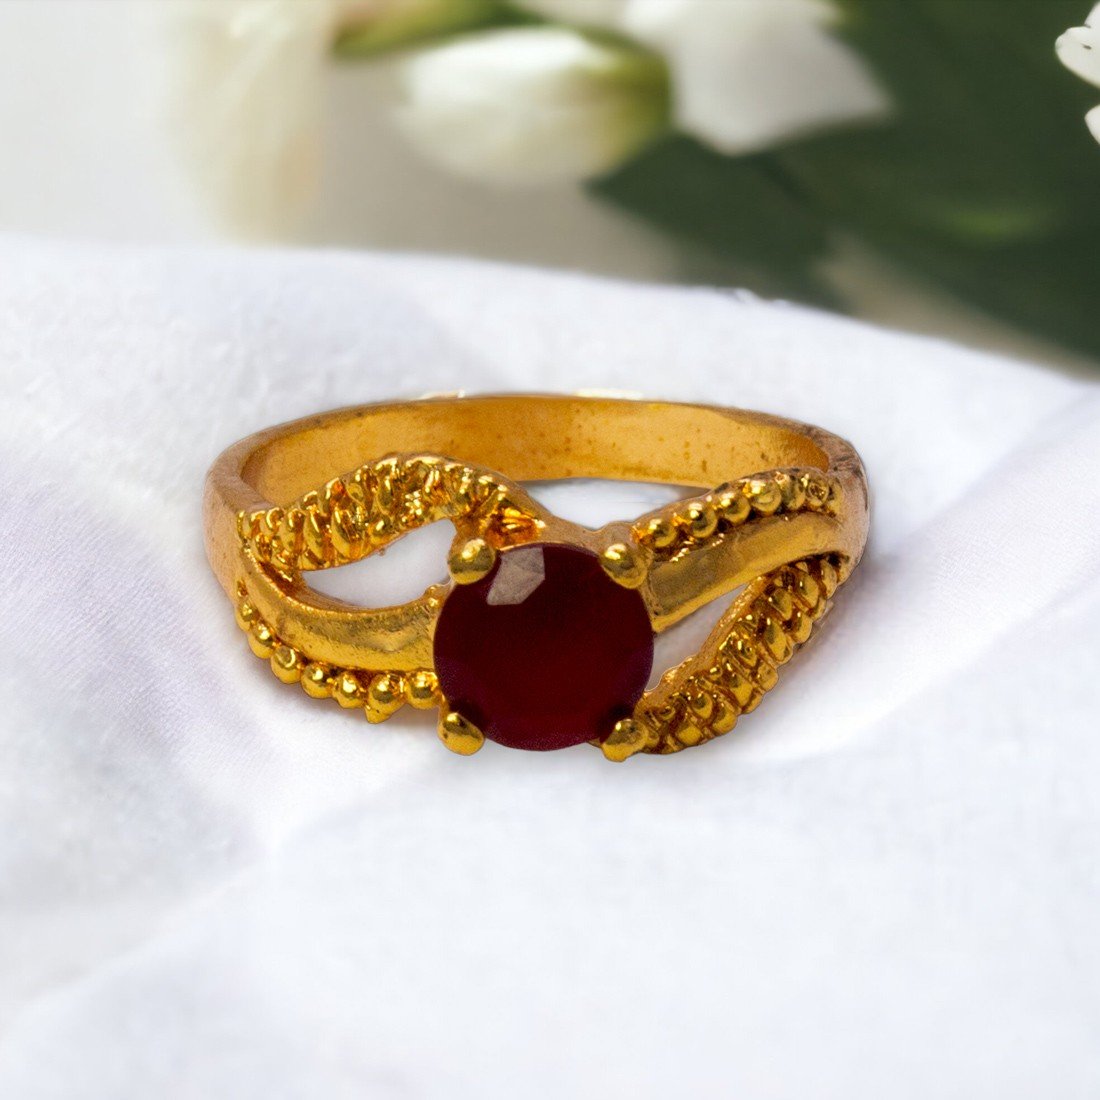 Red ruby engagement ring | Ruby ring gold, Gold ring designs, Ruby jewelry